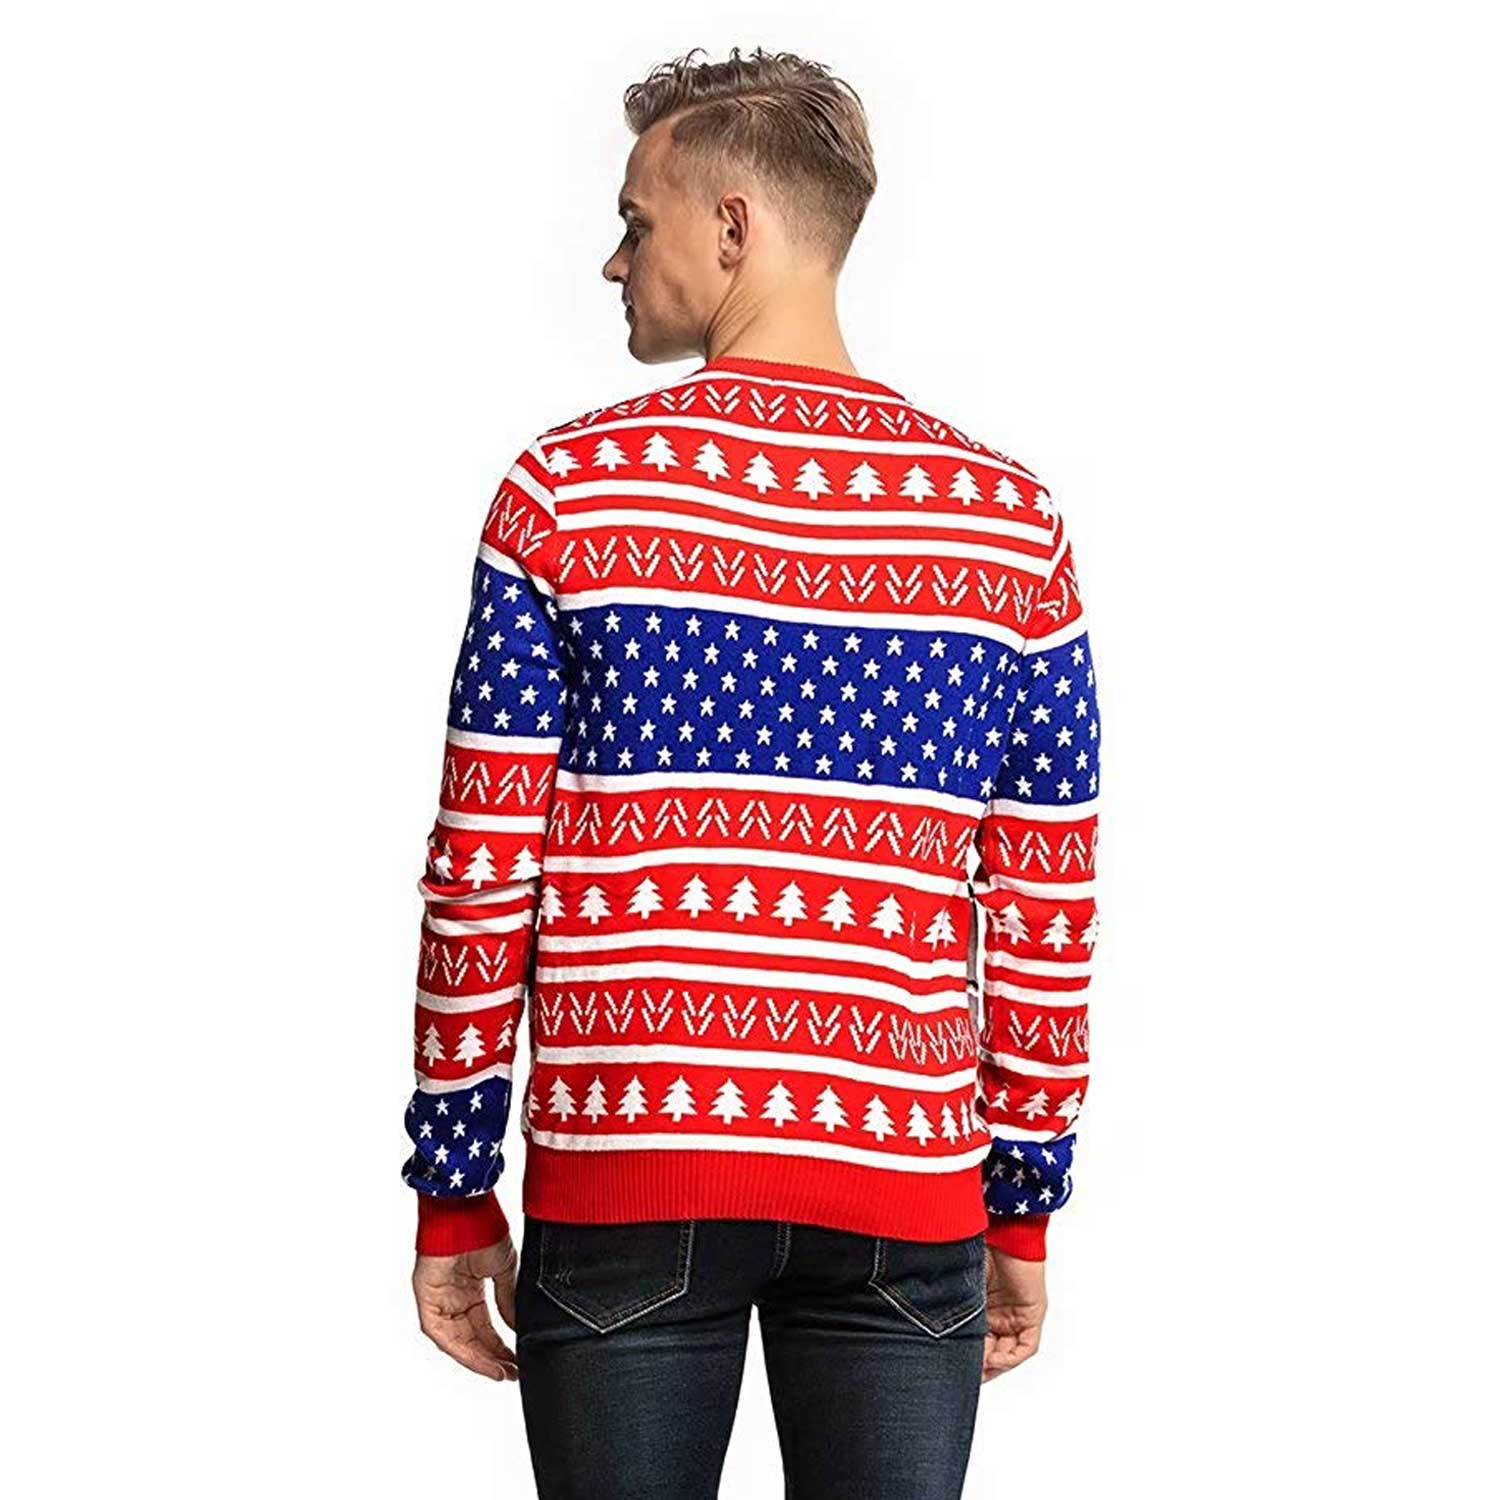 Funny USA Red White and Blue Couples Christmas Sweater